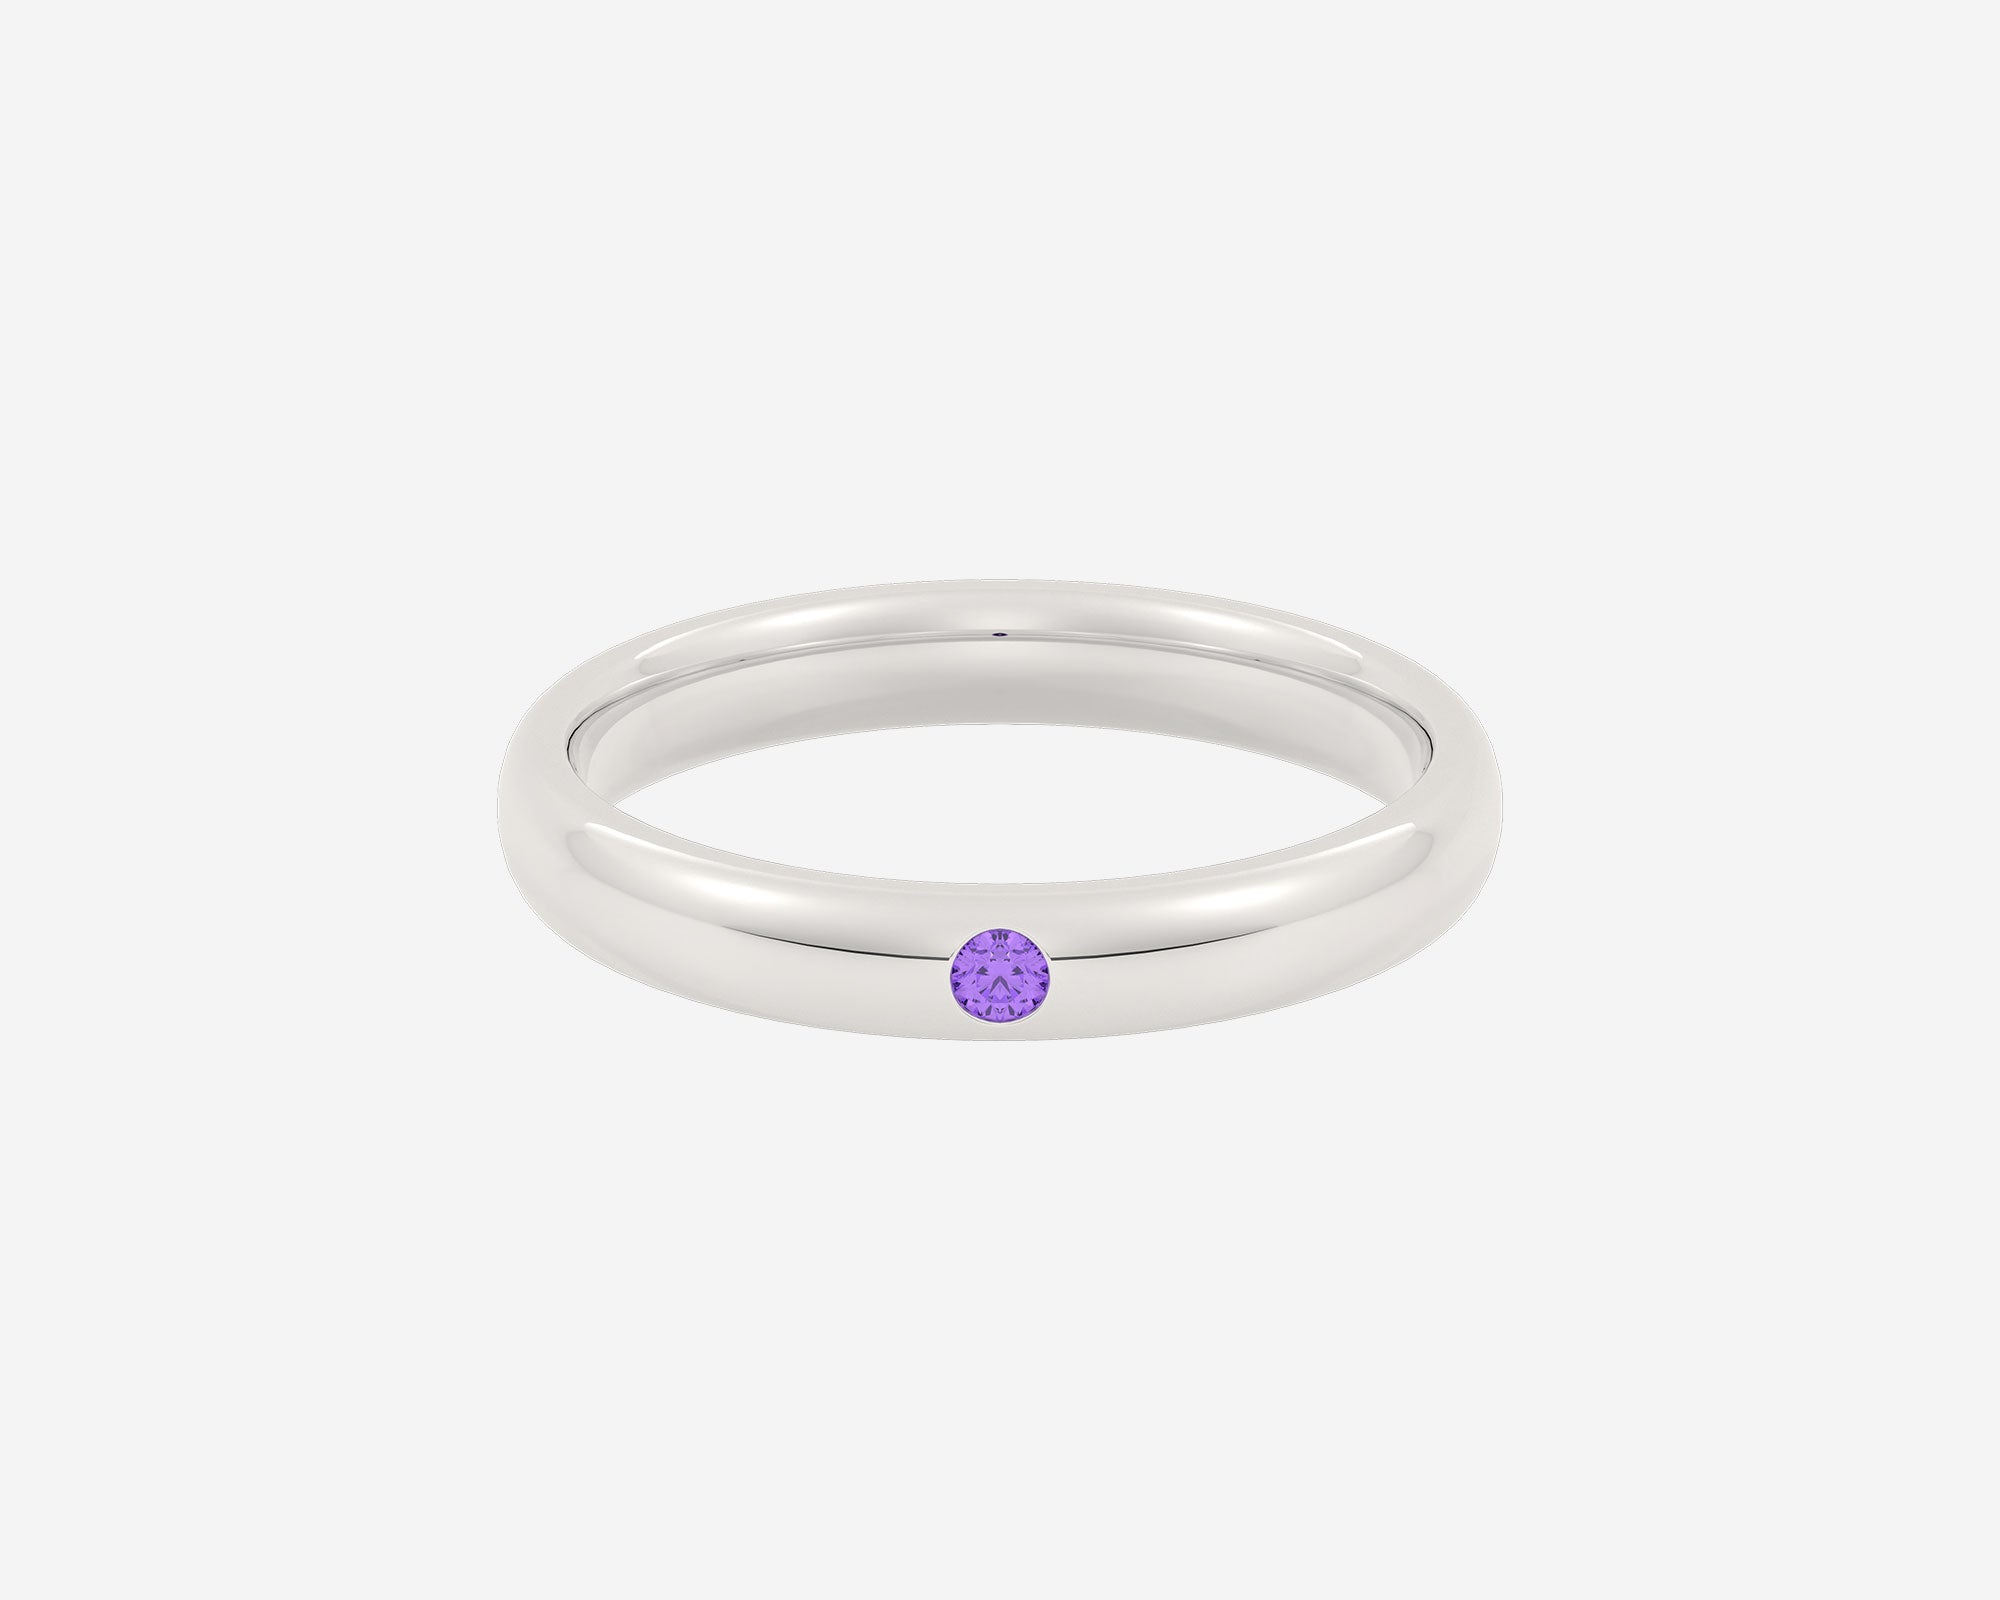 The Flush Gem Ring by Holden in white gold with a purple sapphire